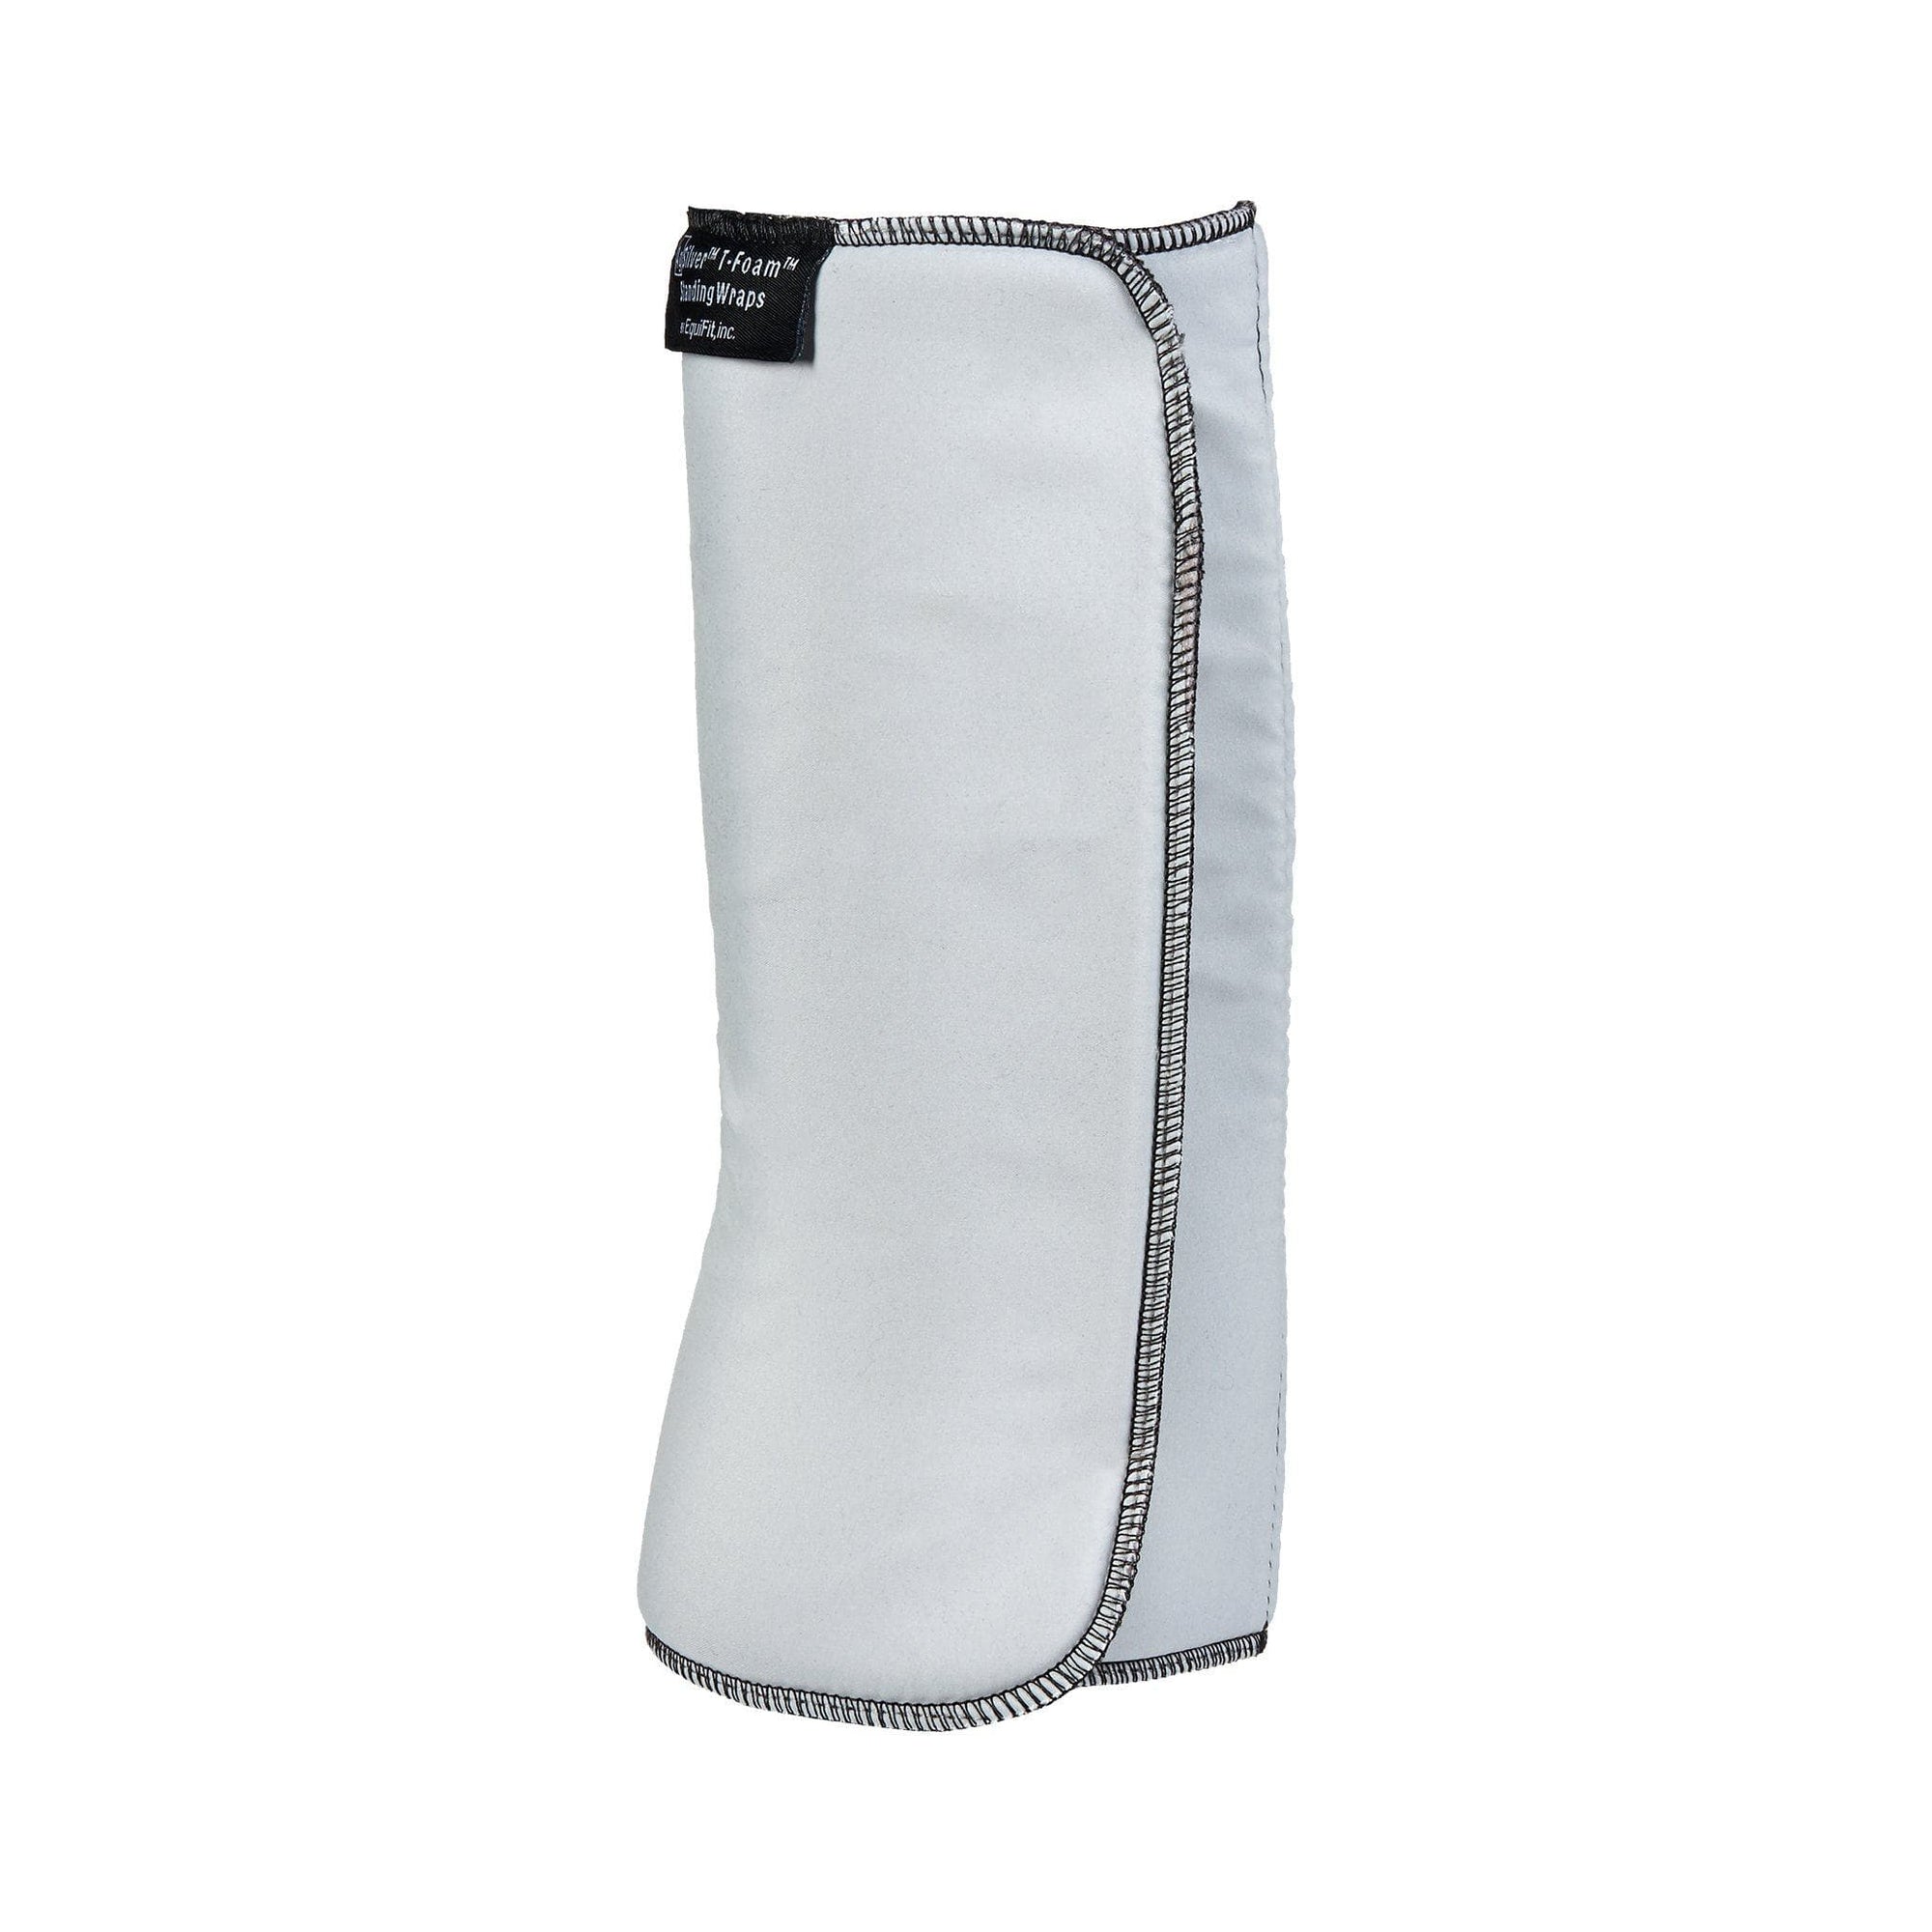 AgSilver T-Foam Standing Wraps are the ultimate support wraps, with no poultice or liniment necessary for use.